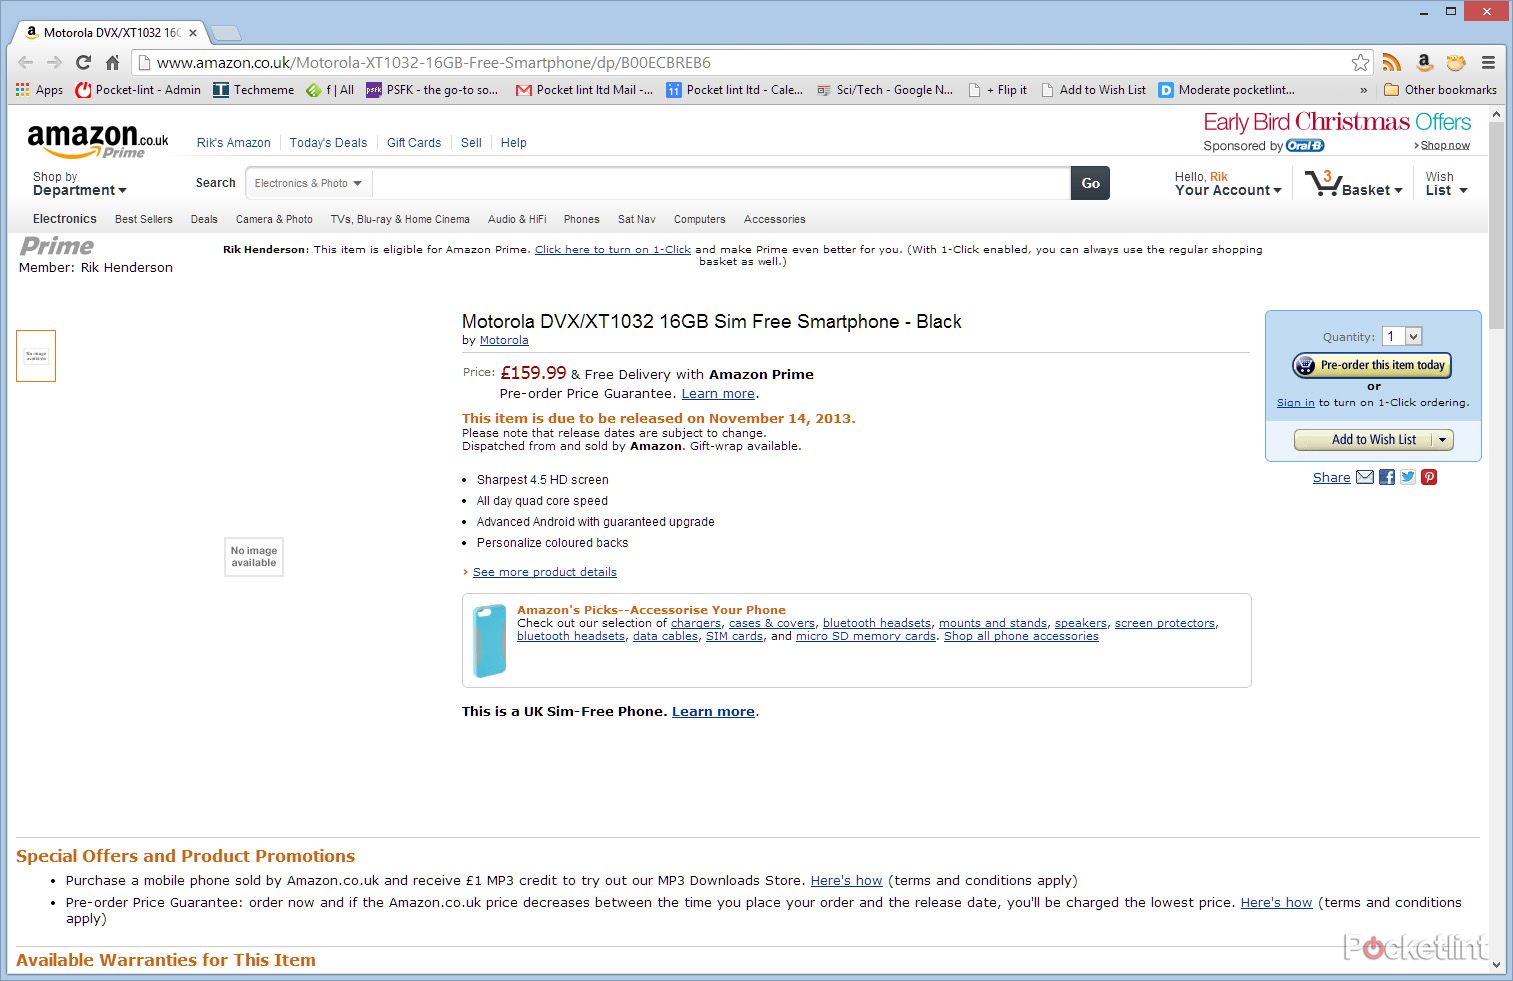 moto g release date price and other details appear on amazon co uk image 2